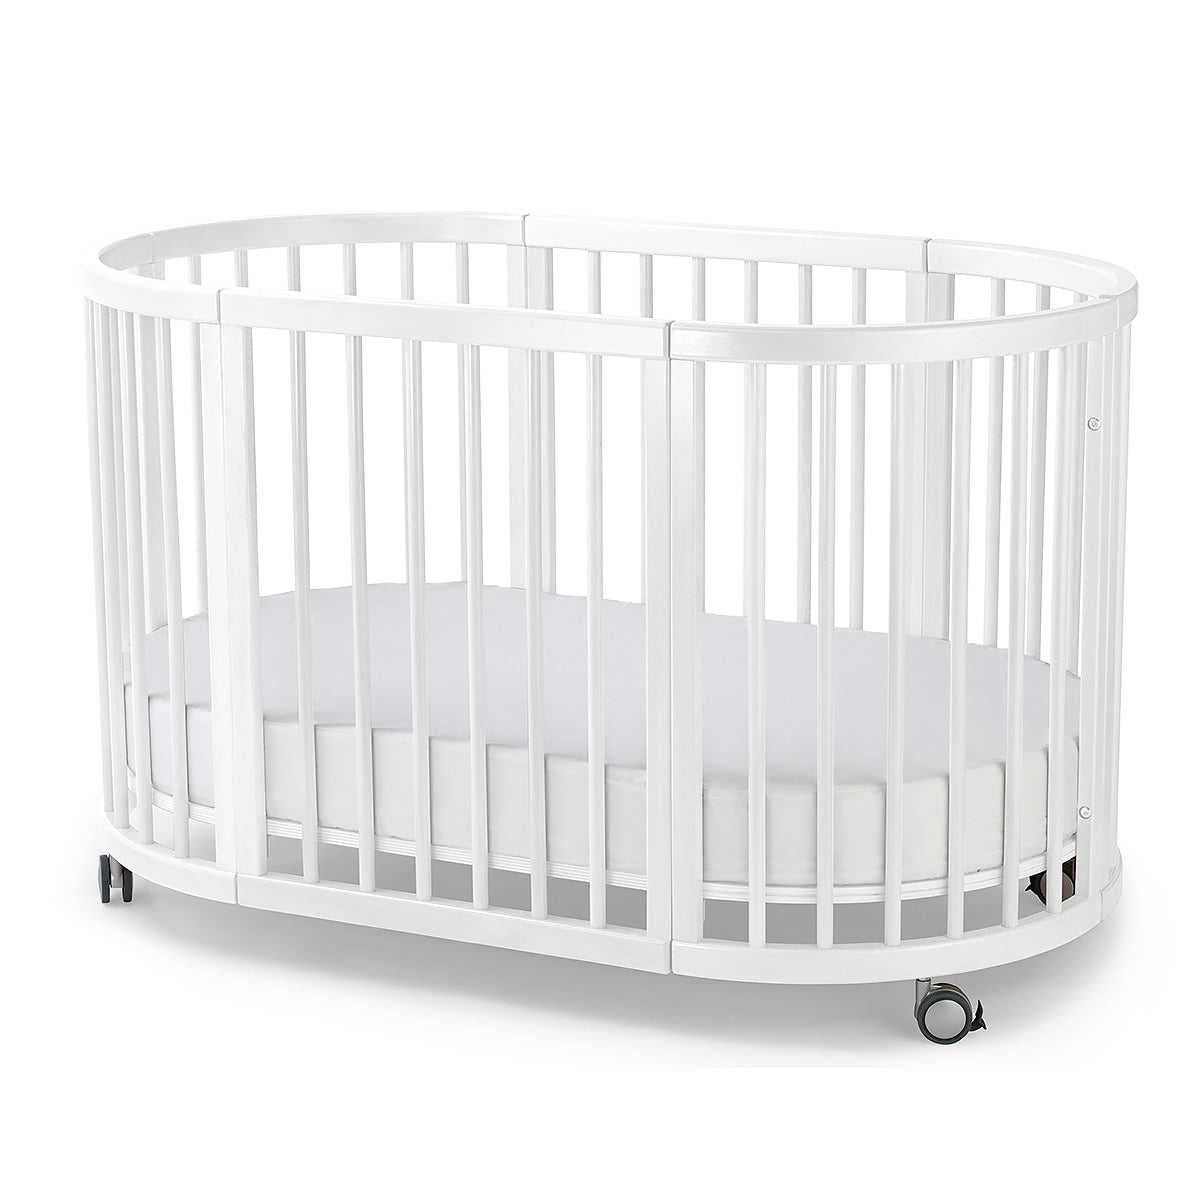 Lolli Sprout Cot 4 in 1 WHITE with Mattress - Tiny Tots Baby Store 